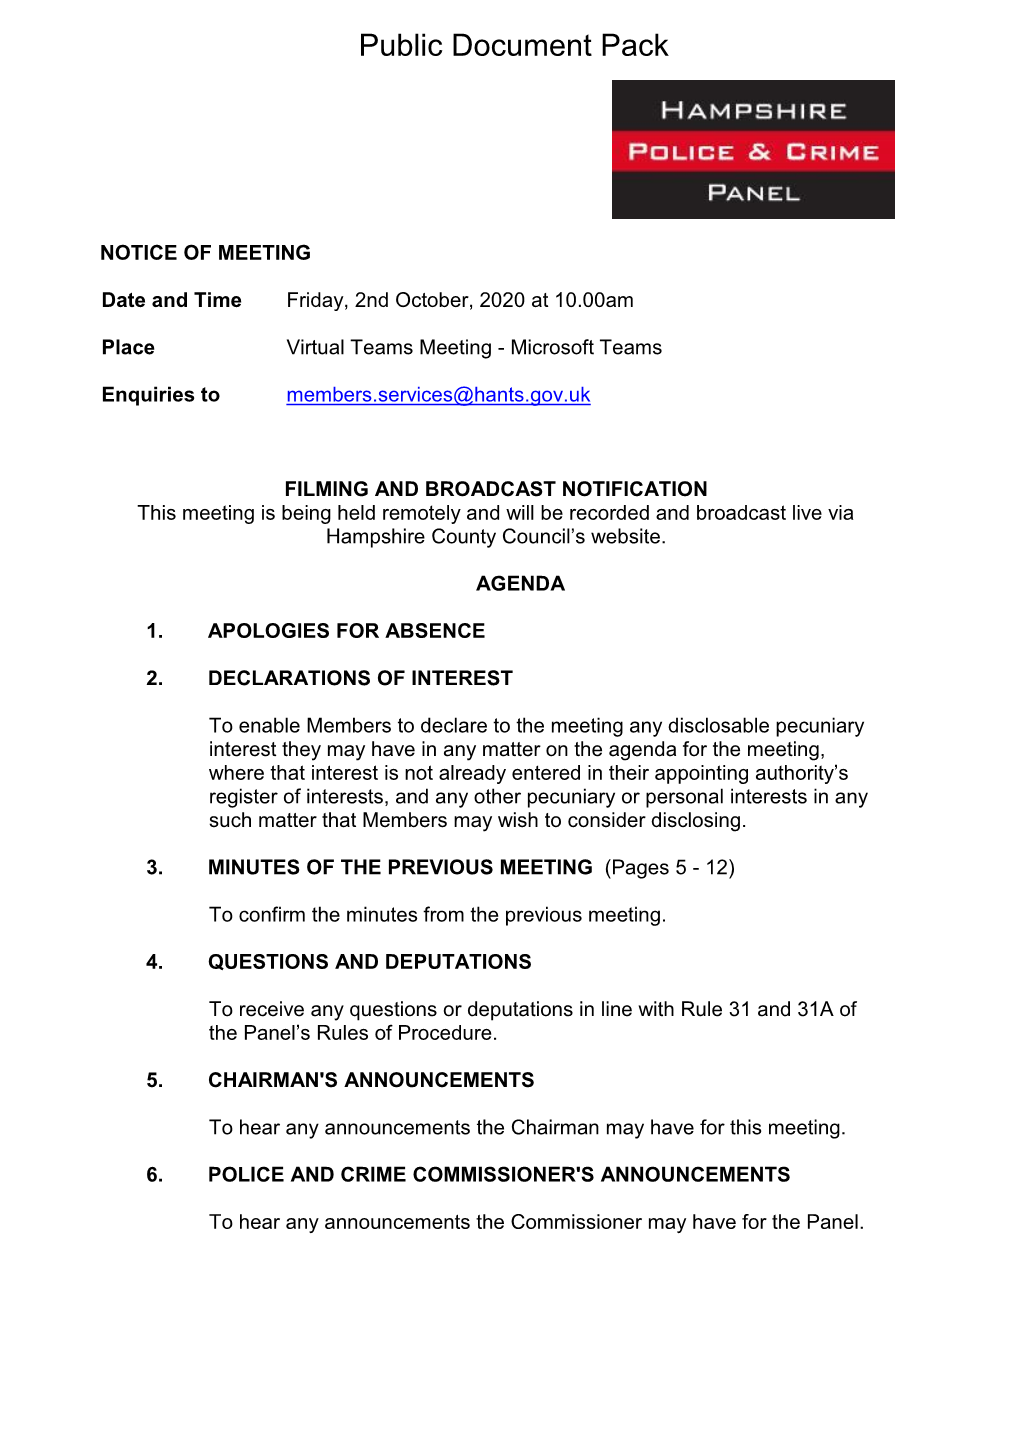 (Public Pack)Agenda Document for Hampshire Police and Crime Panel